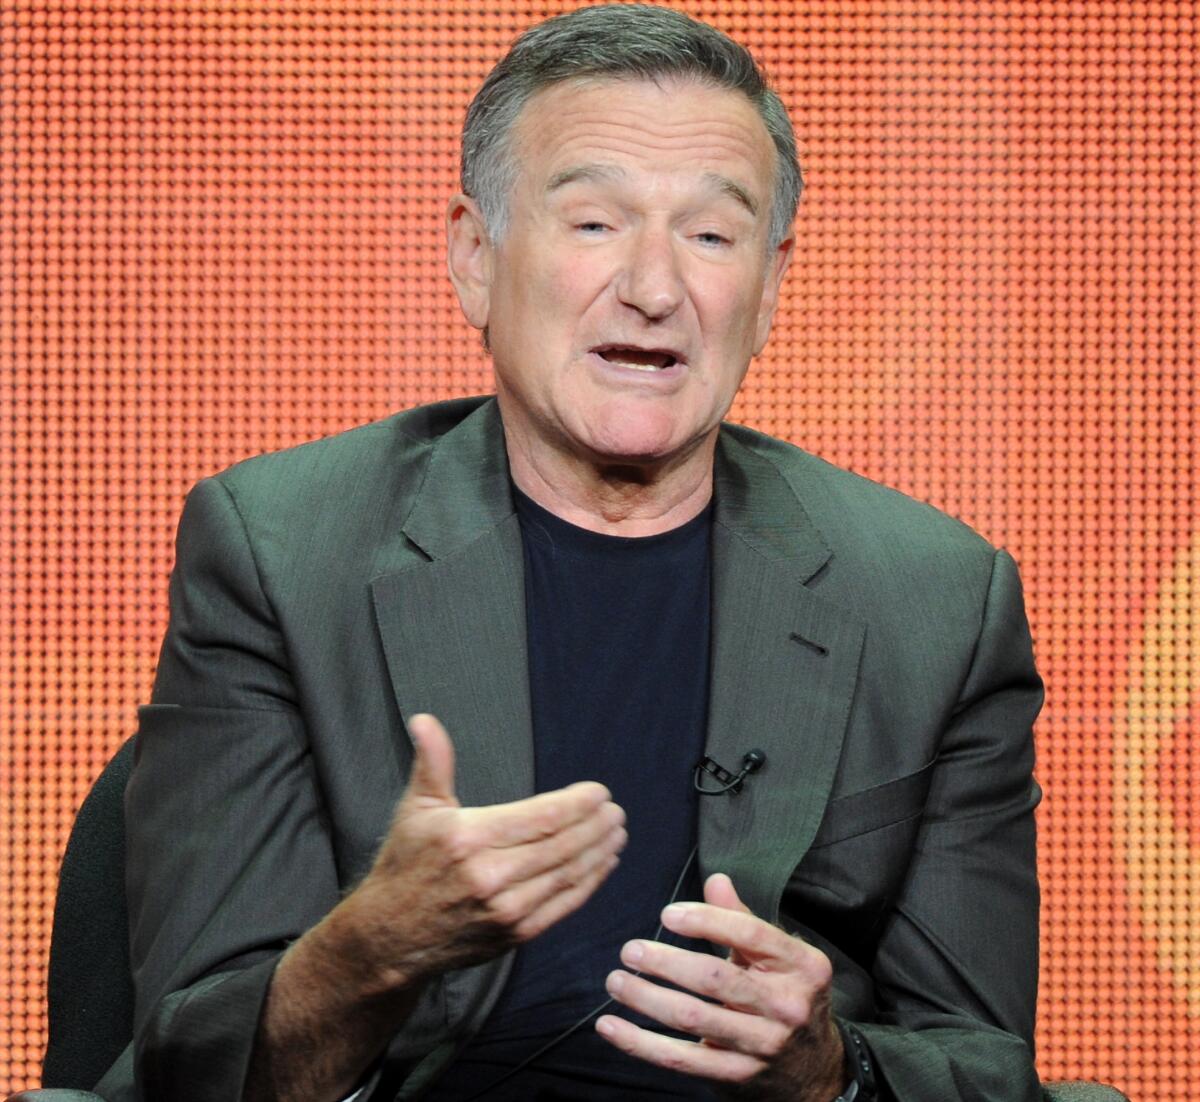 Robin Williams opens his mouth and gestures with his hands while sitting in front of an orange background.